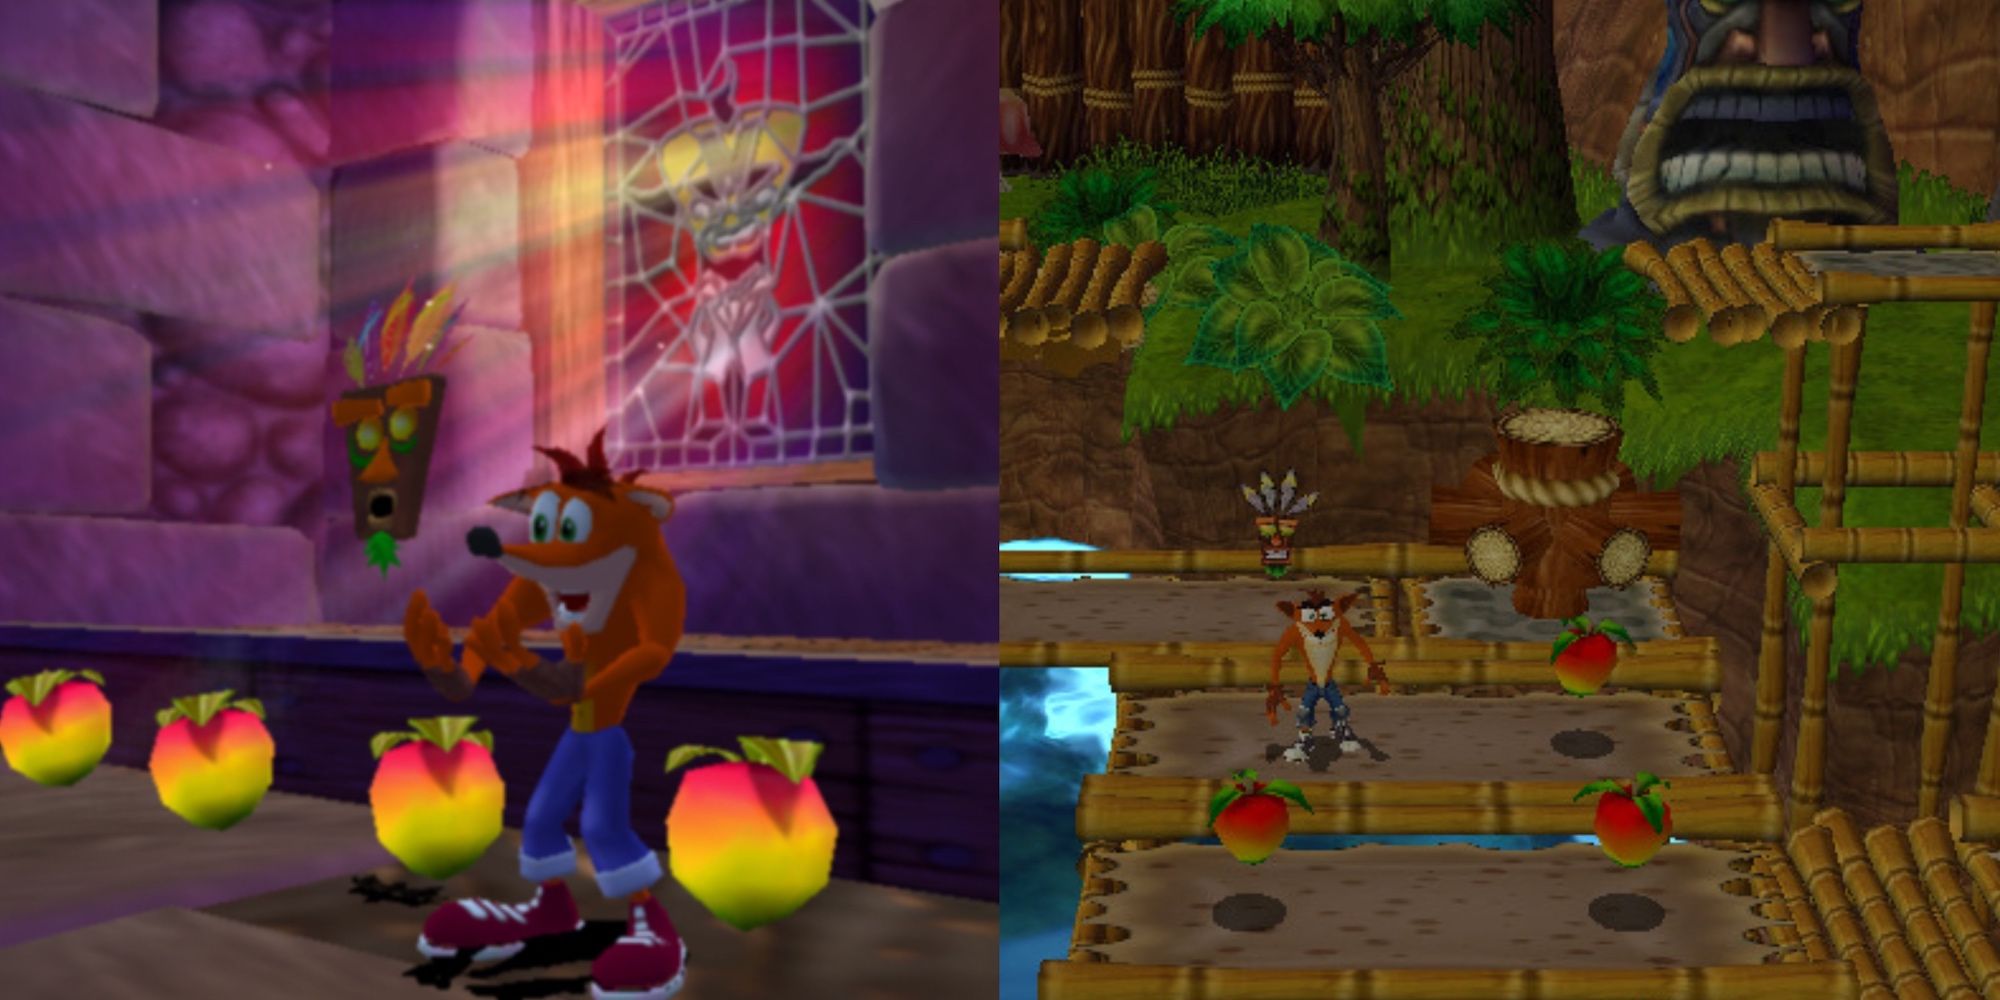 Wrath of cortex on the left, twin sanity on the right